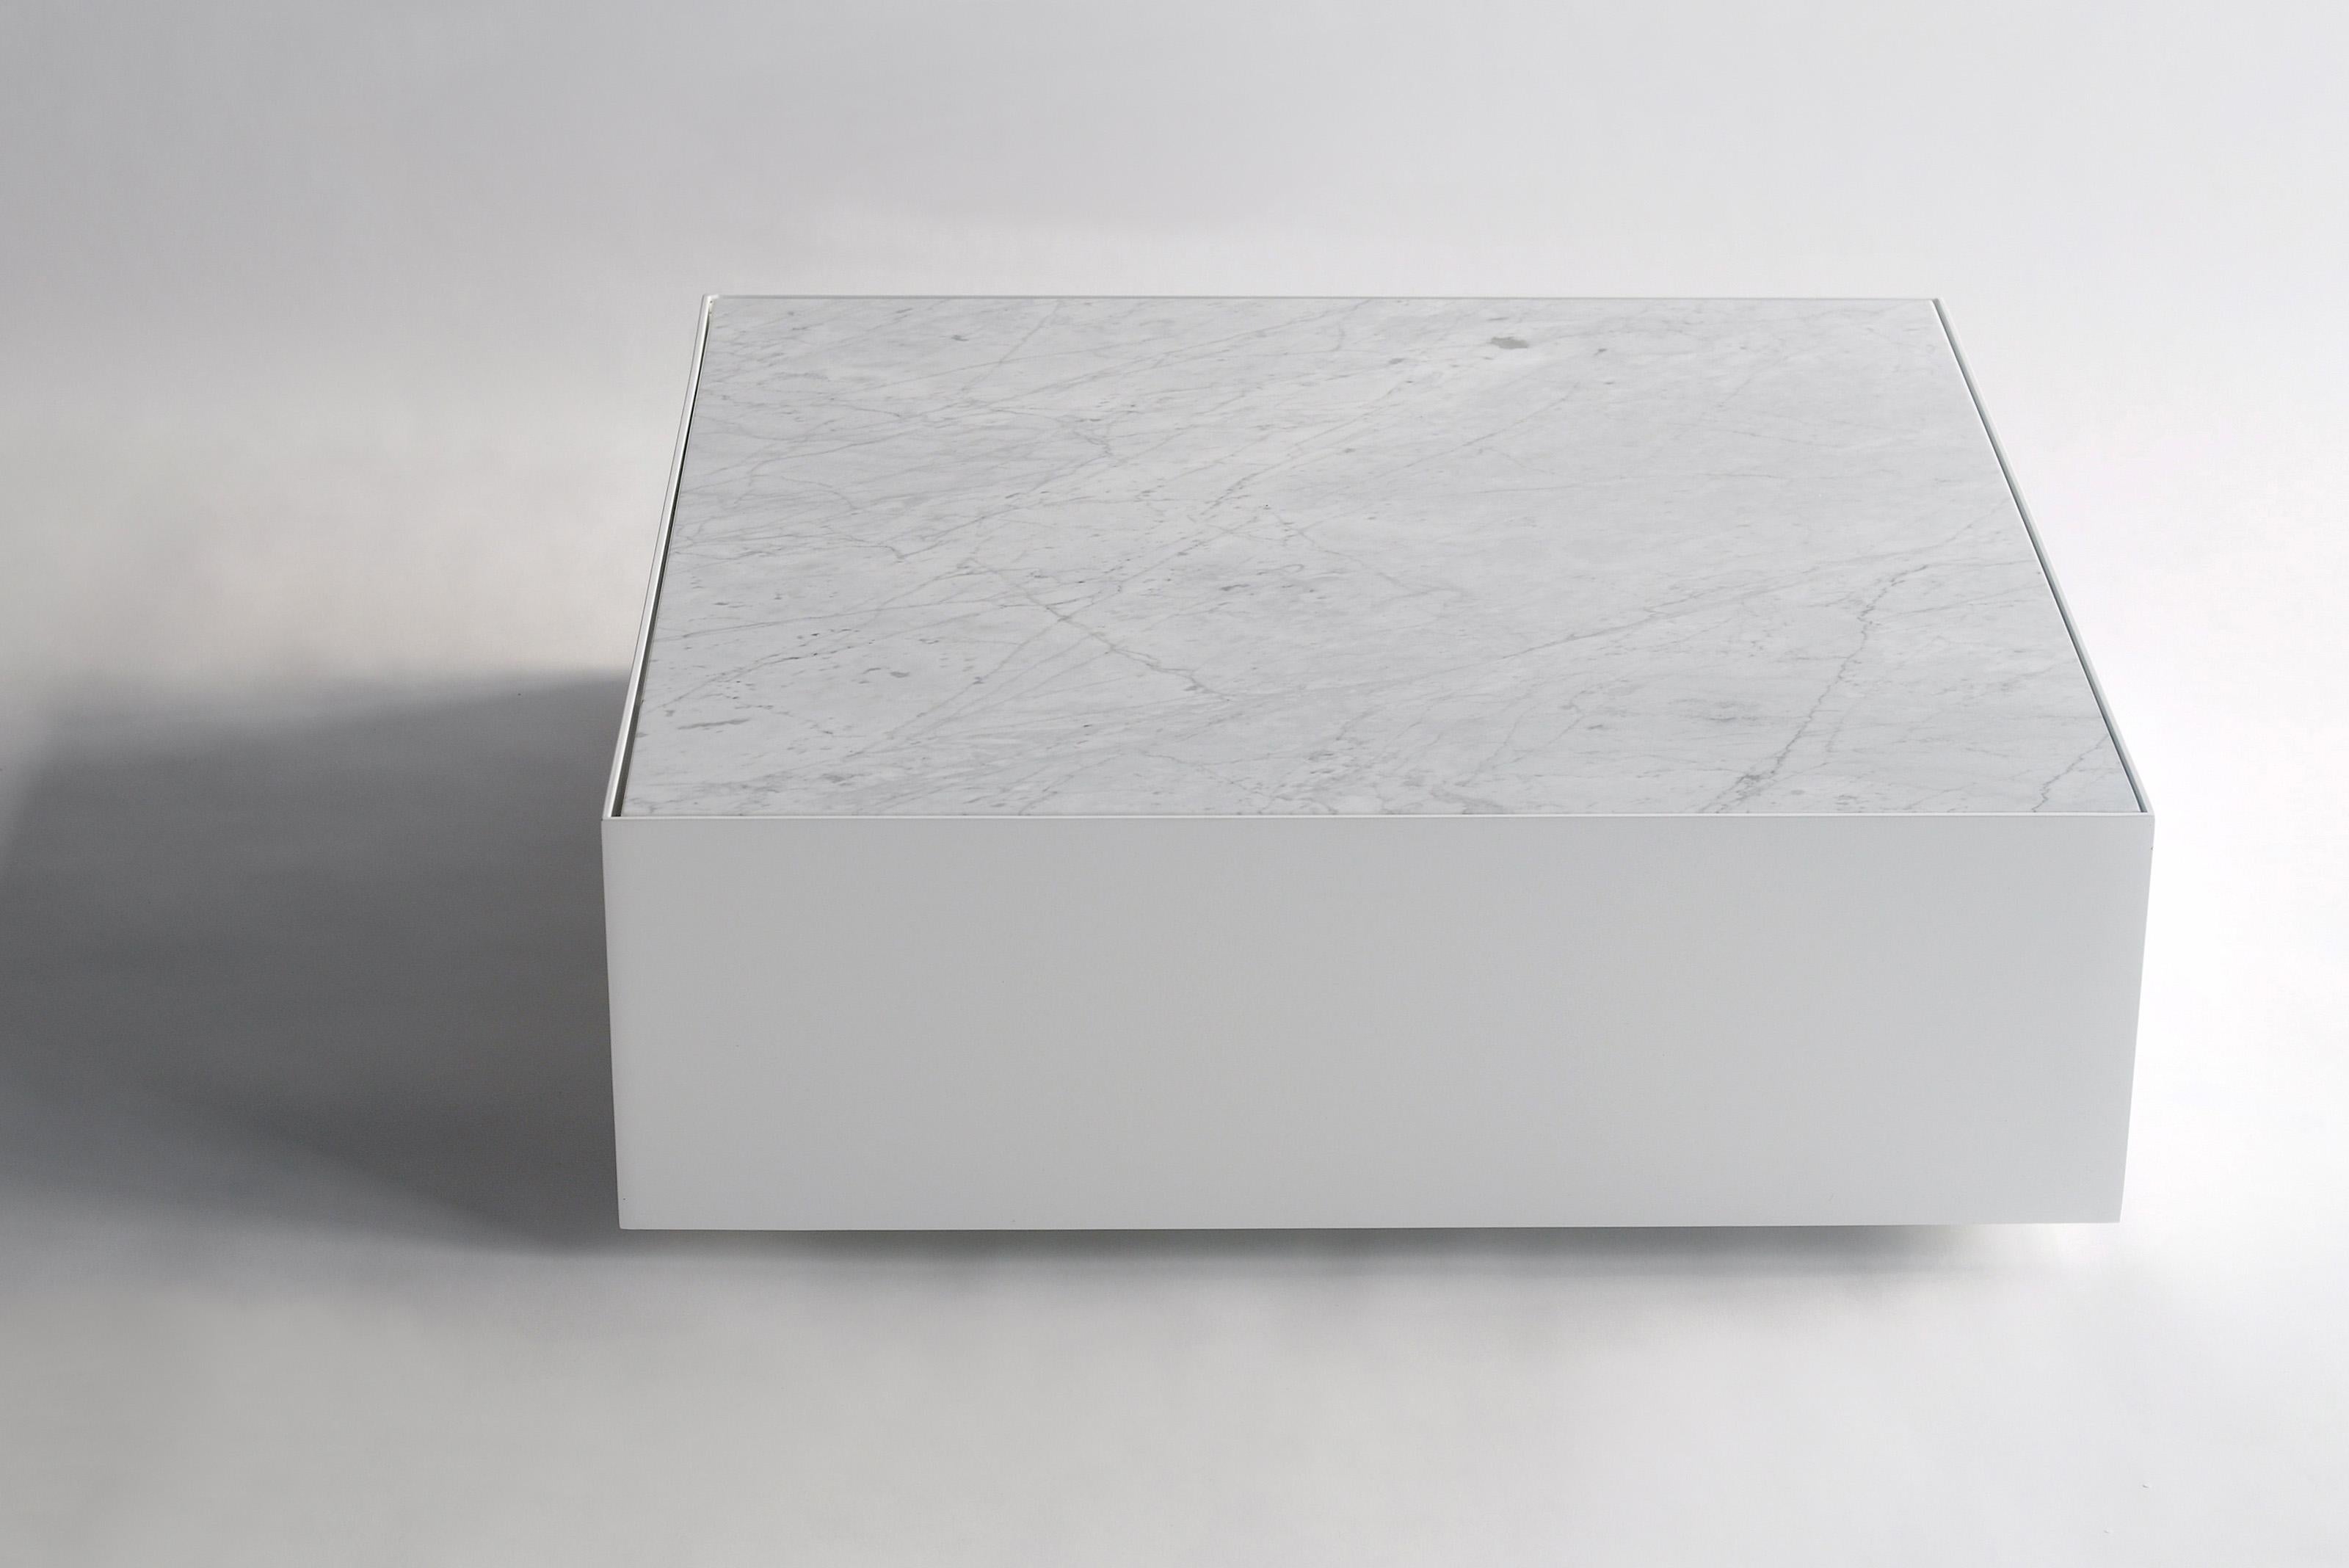 Marble Ballot Coffee Table by Phase Design
Dimensions: D 76,2 x W 76,2 x H 25,4 cm.
Materials: White marble and white powder-coated steel.

Steel coffee table with white carrara or negro marquina marble top. Available in polished chrome or powder